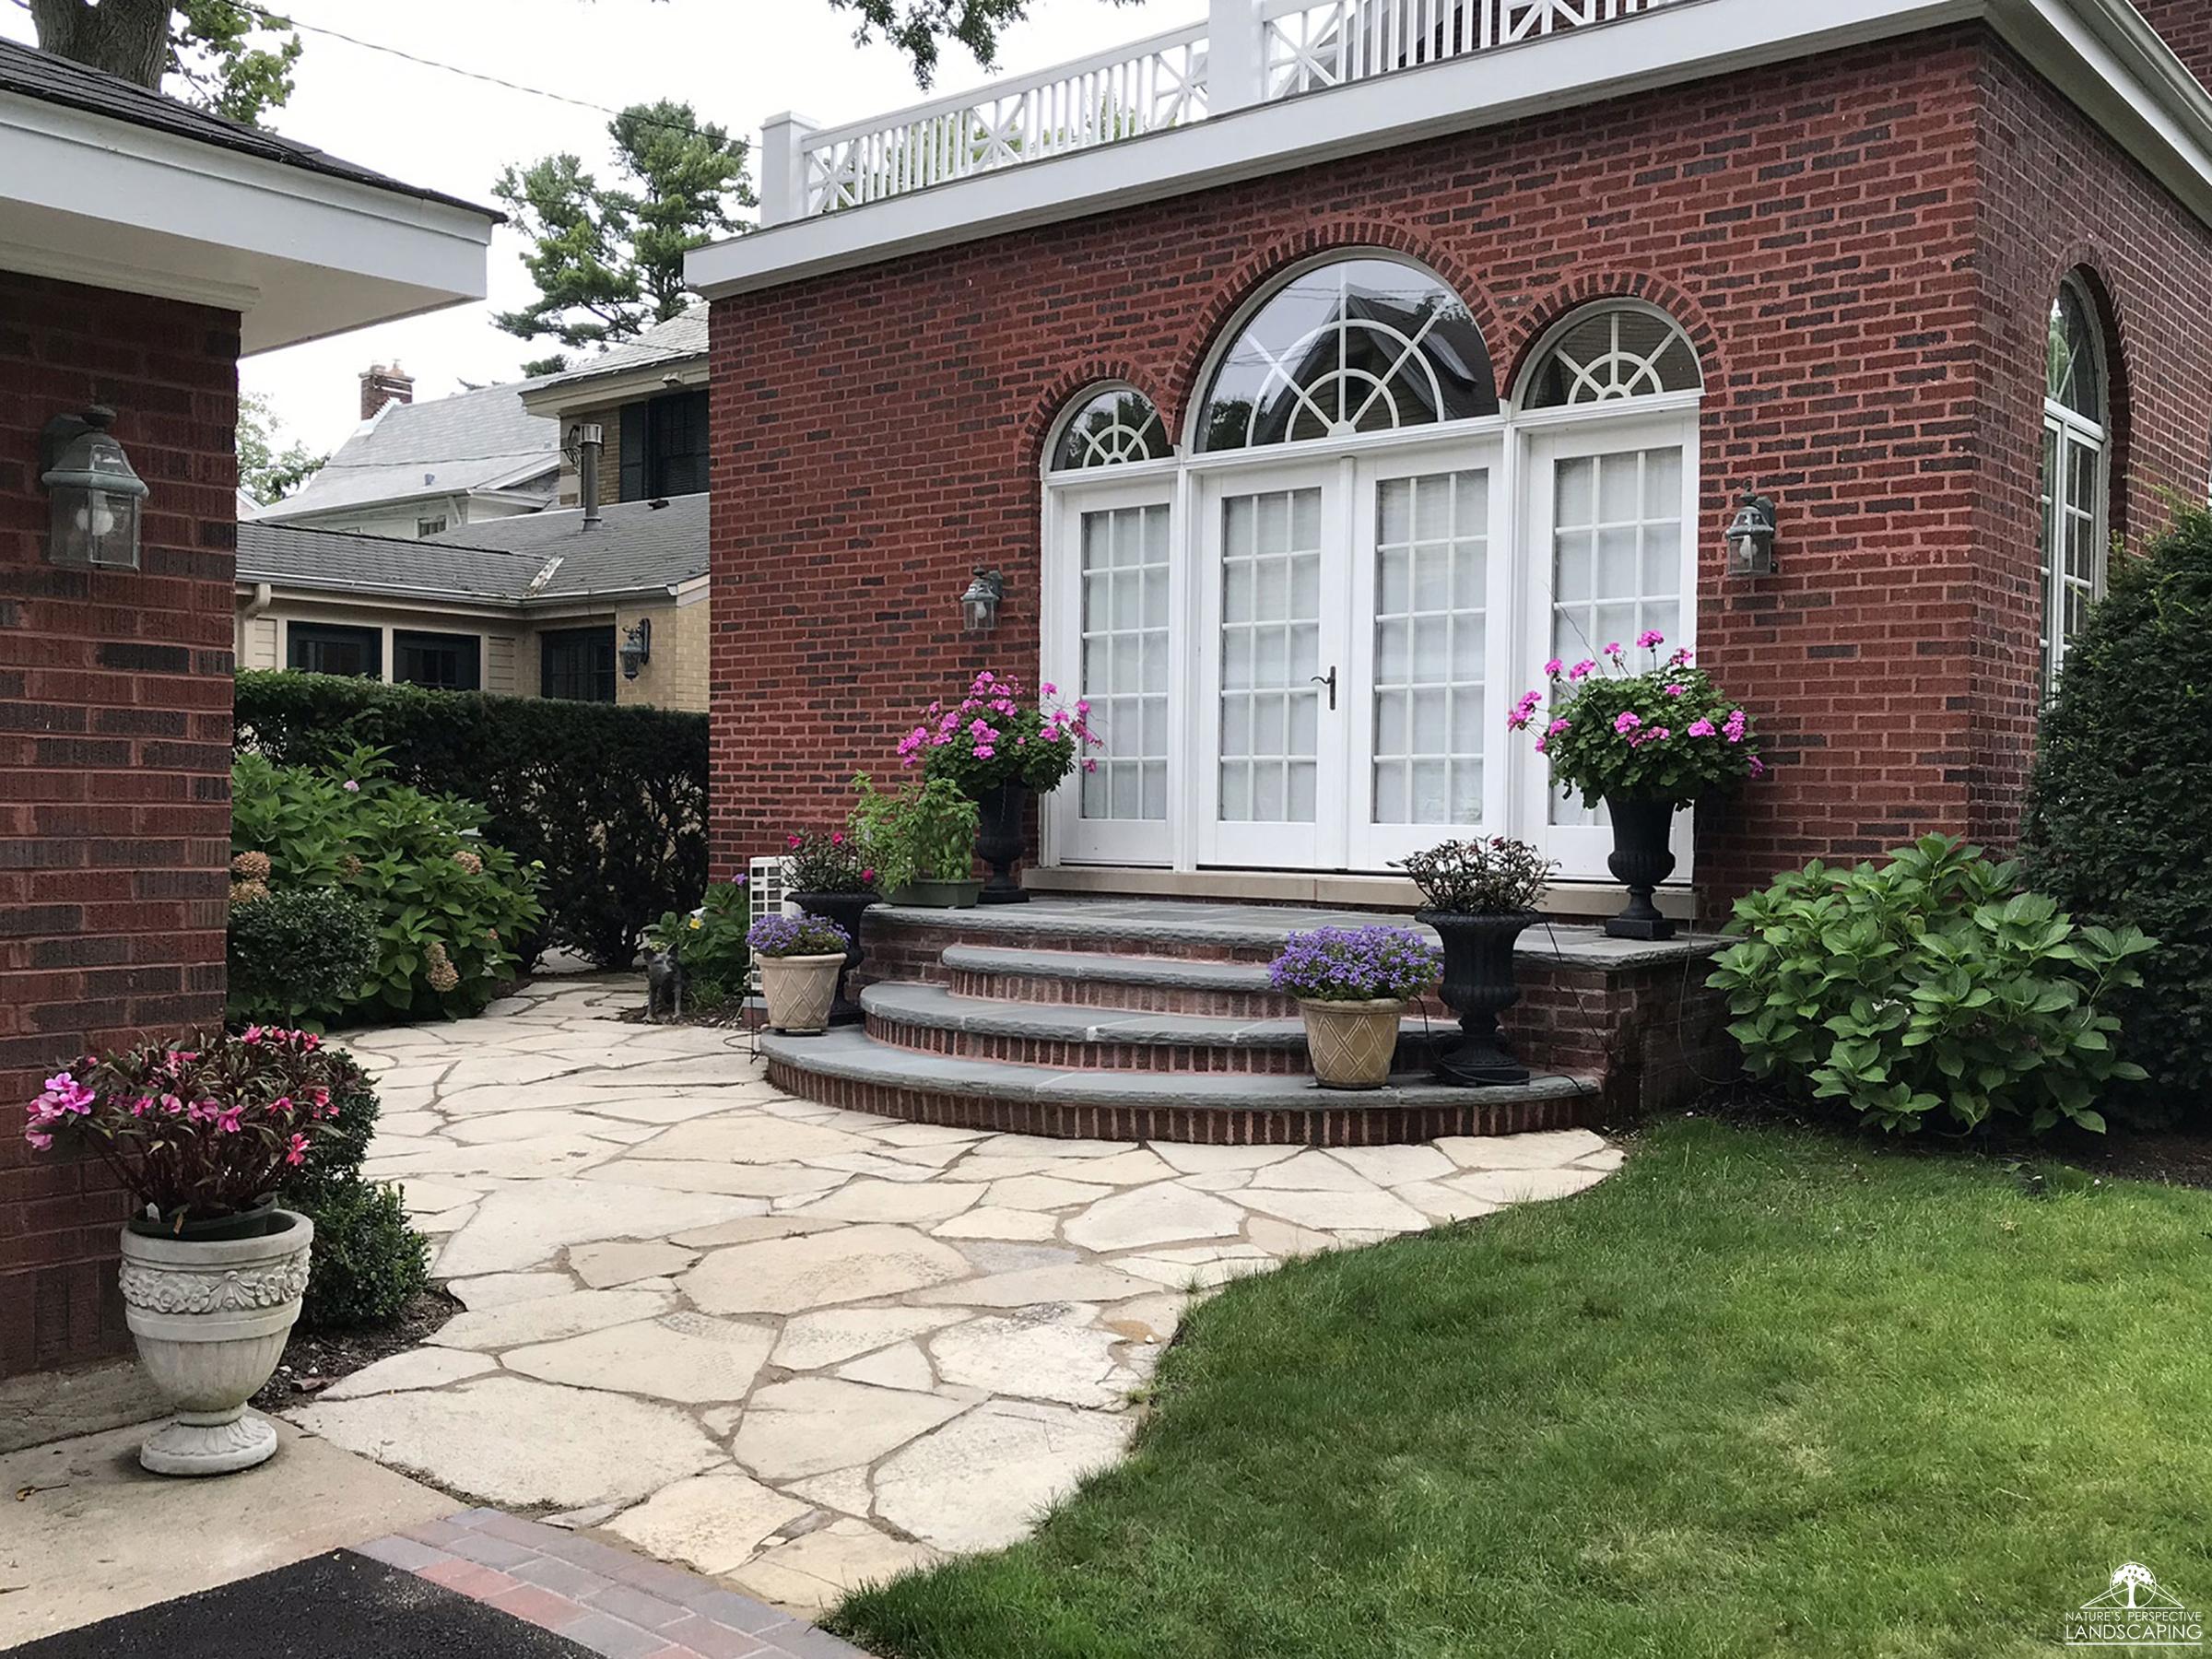 French doors with bluestone and brick stoop, steps and limestone patio